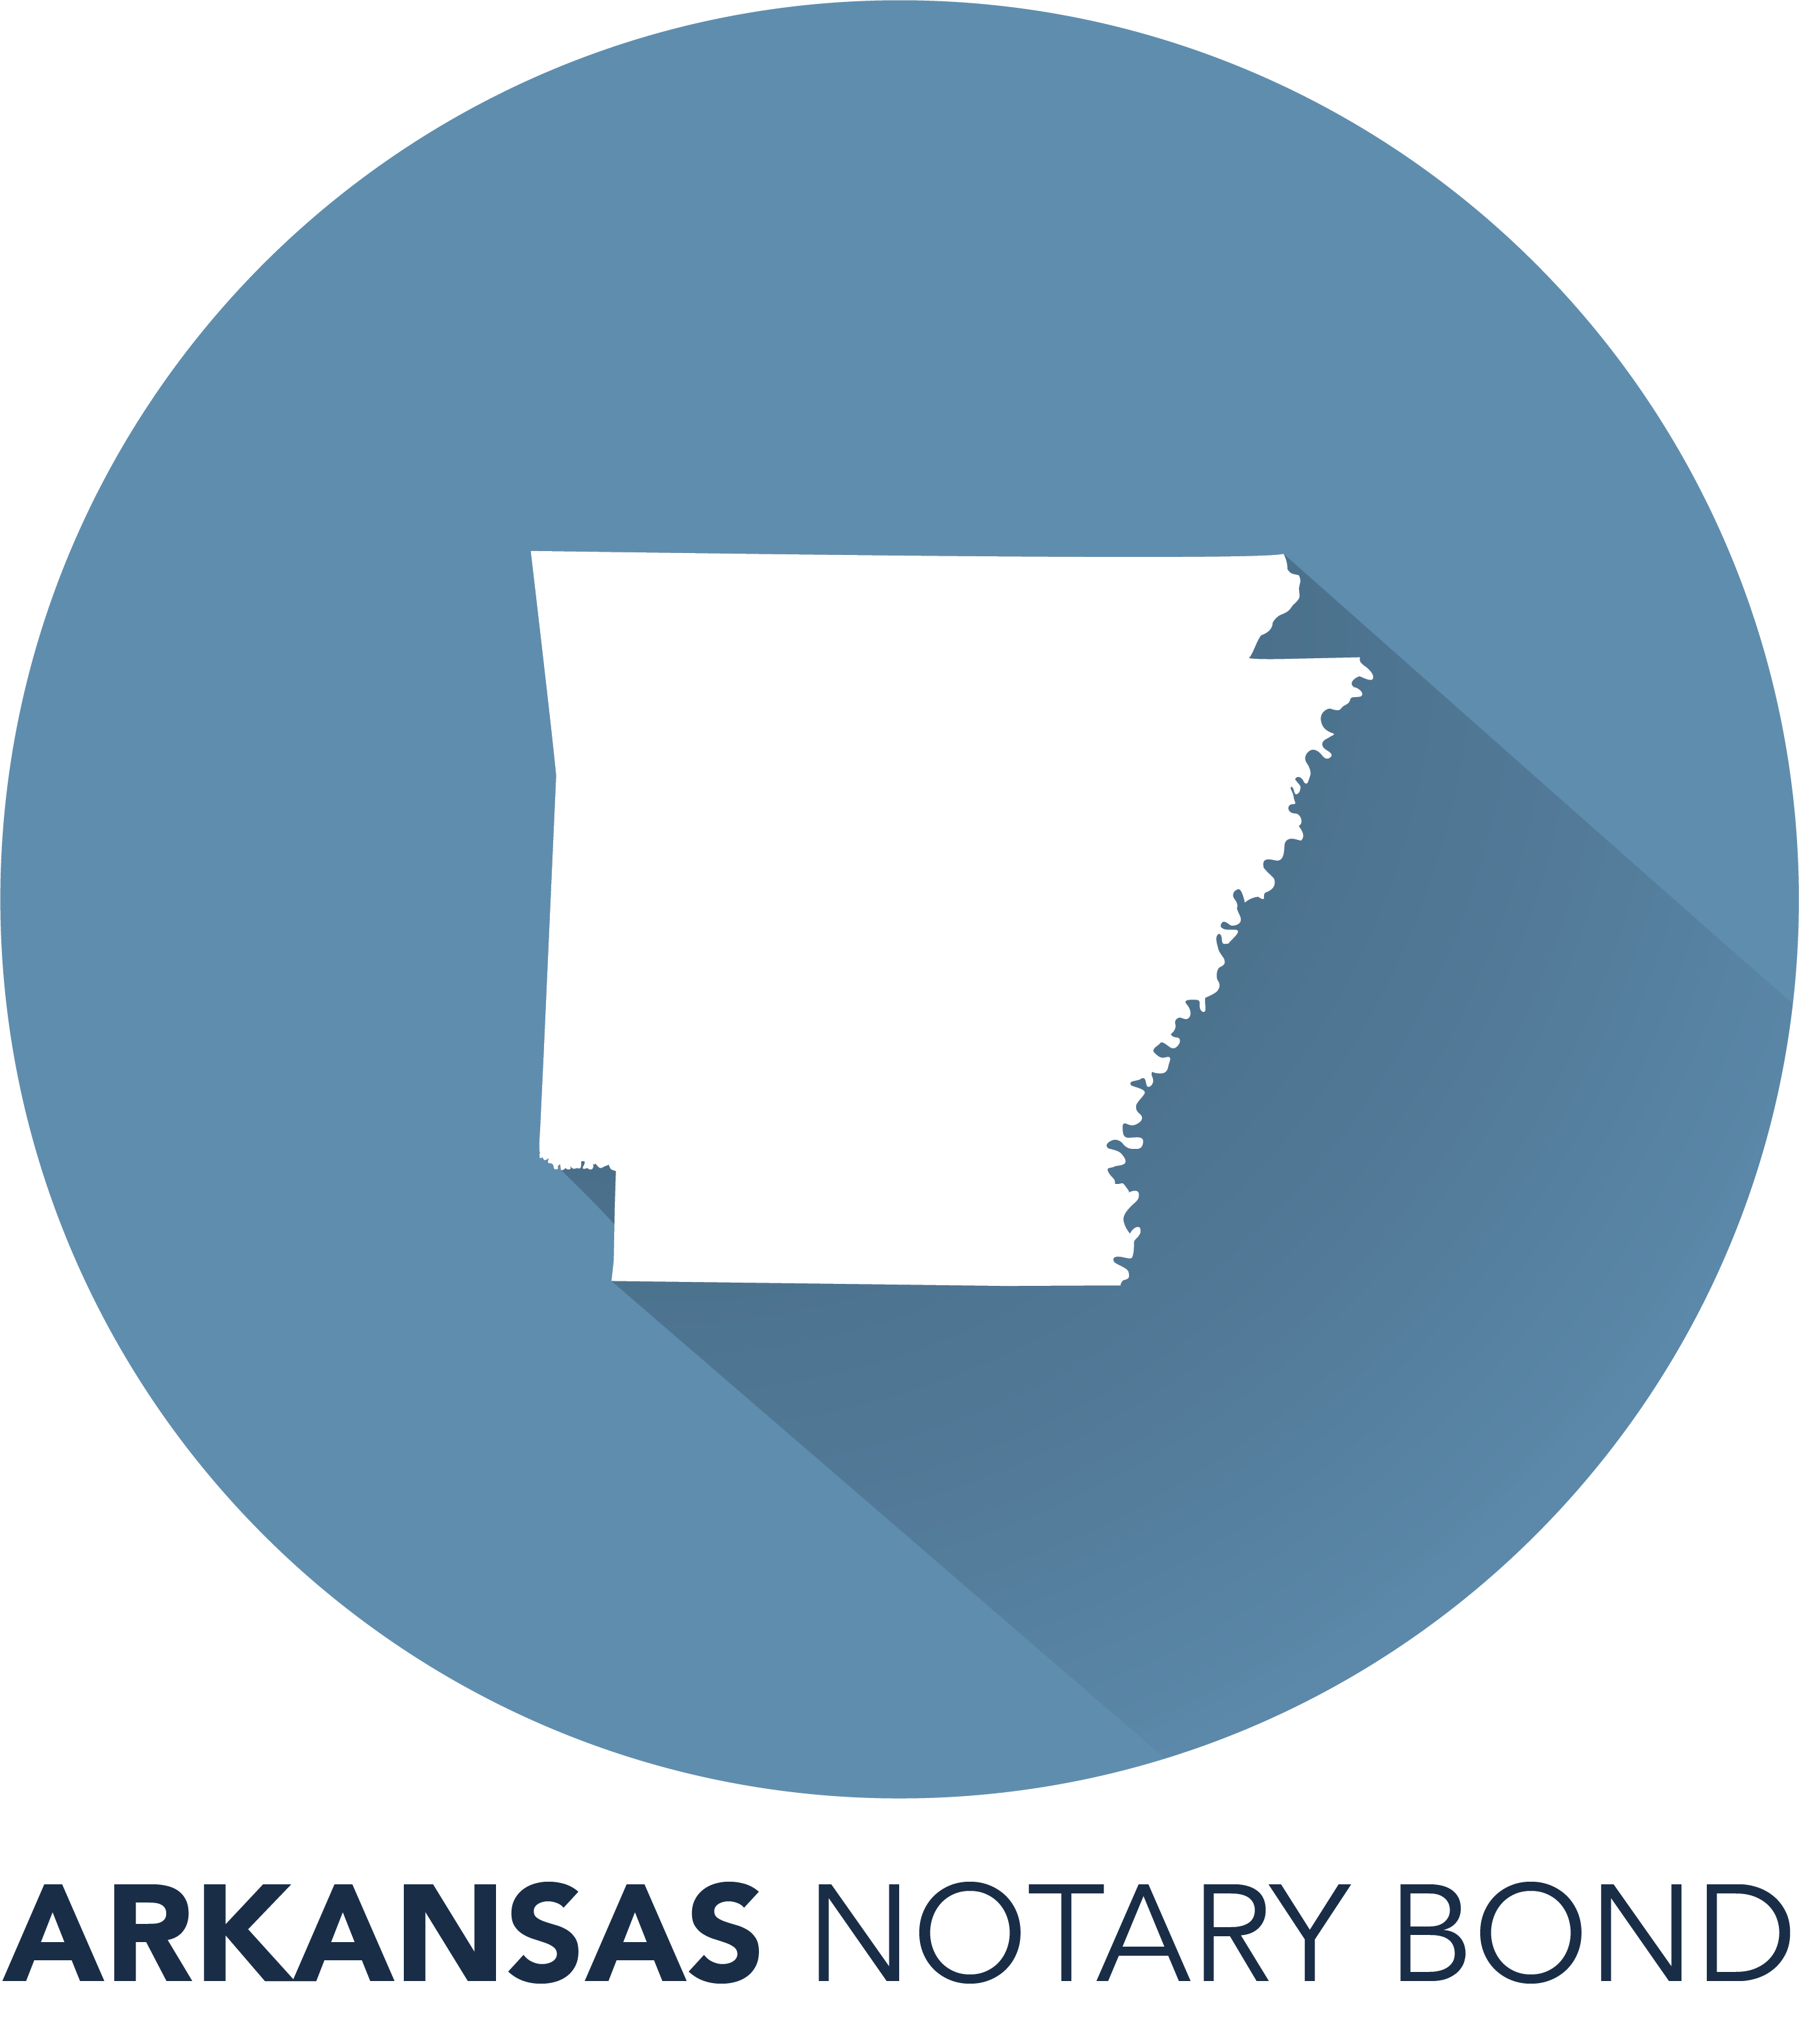 A blue circle with the state of arkansas in it